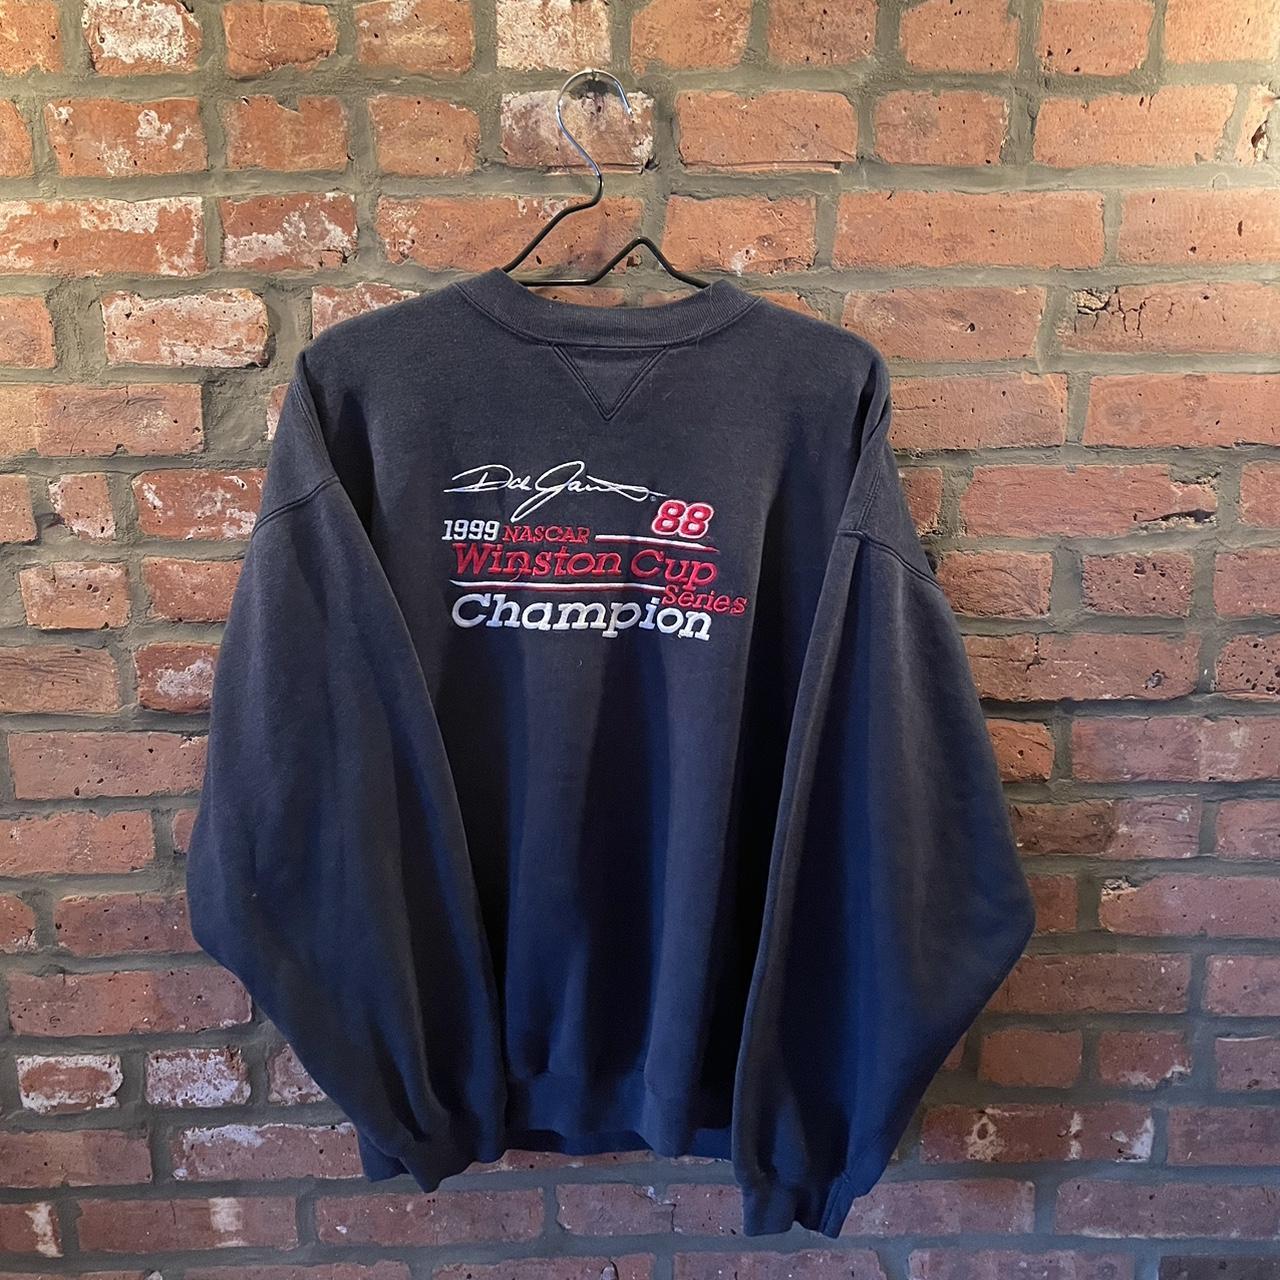 Chase Authentics Men's Navy and Red Sweatshirt